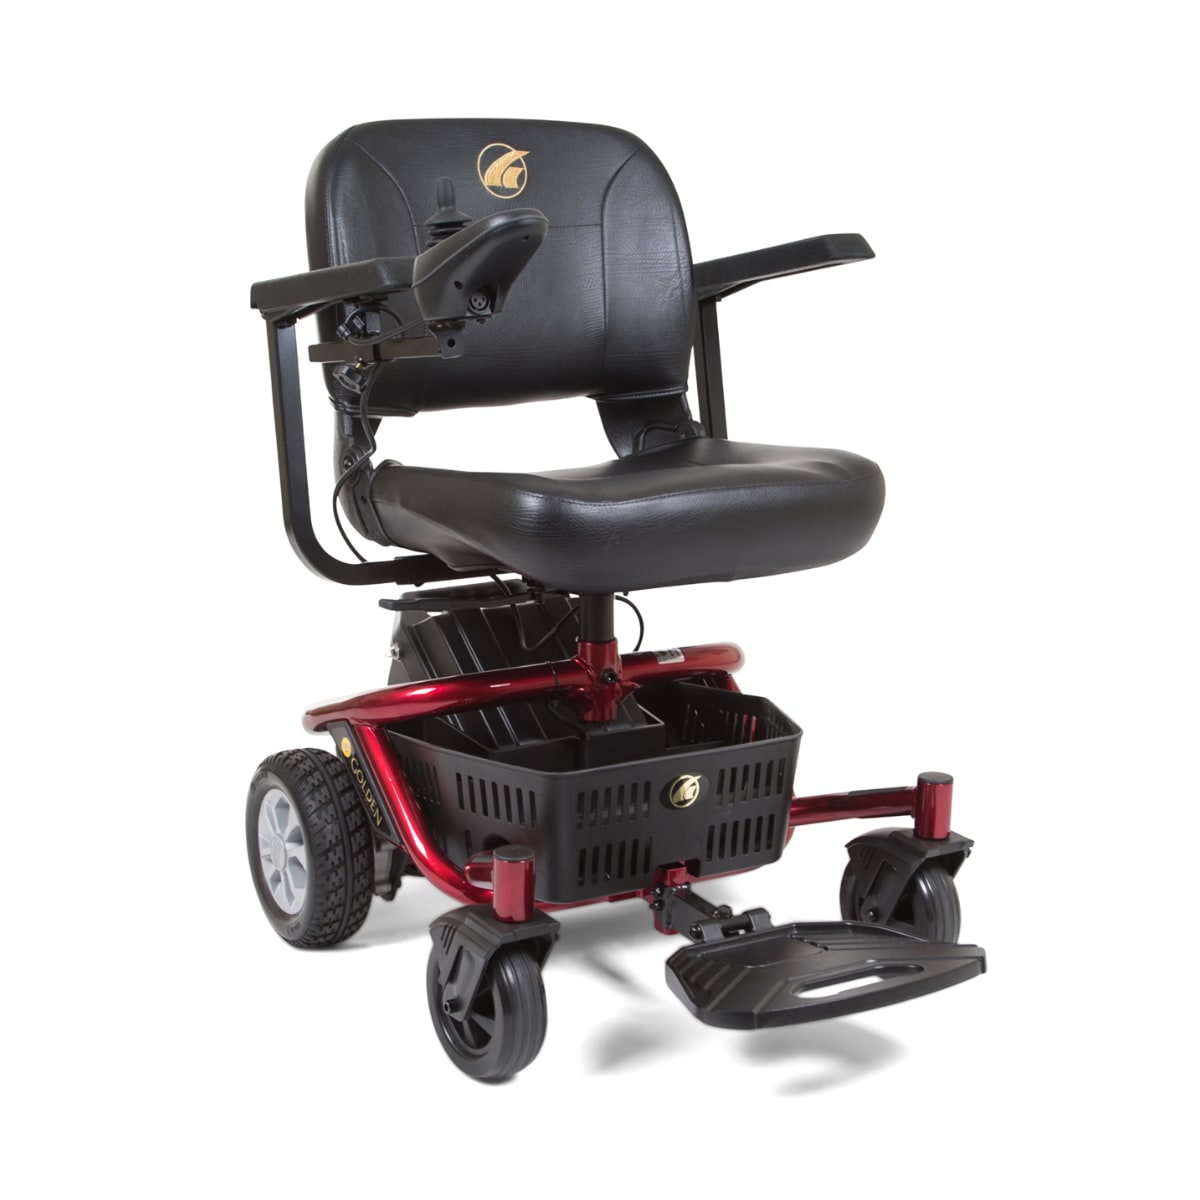 LiteRider Envy power wheel chair with shorter back and red accents